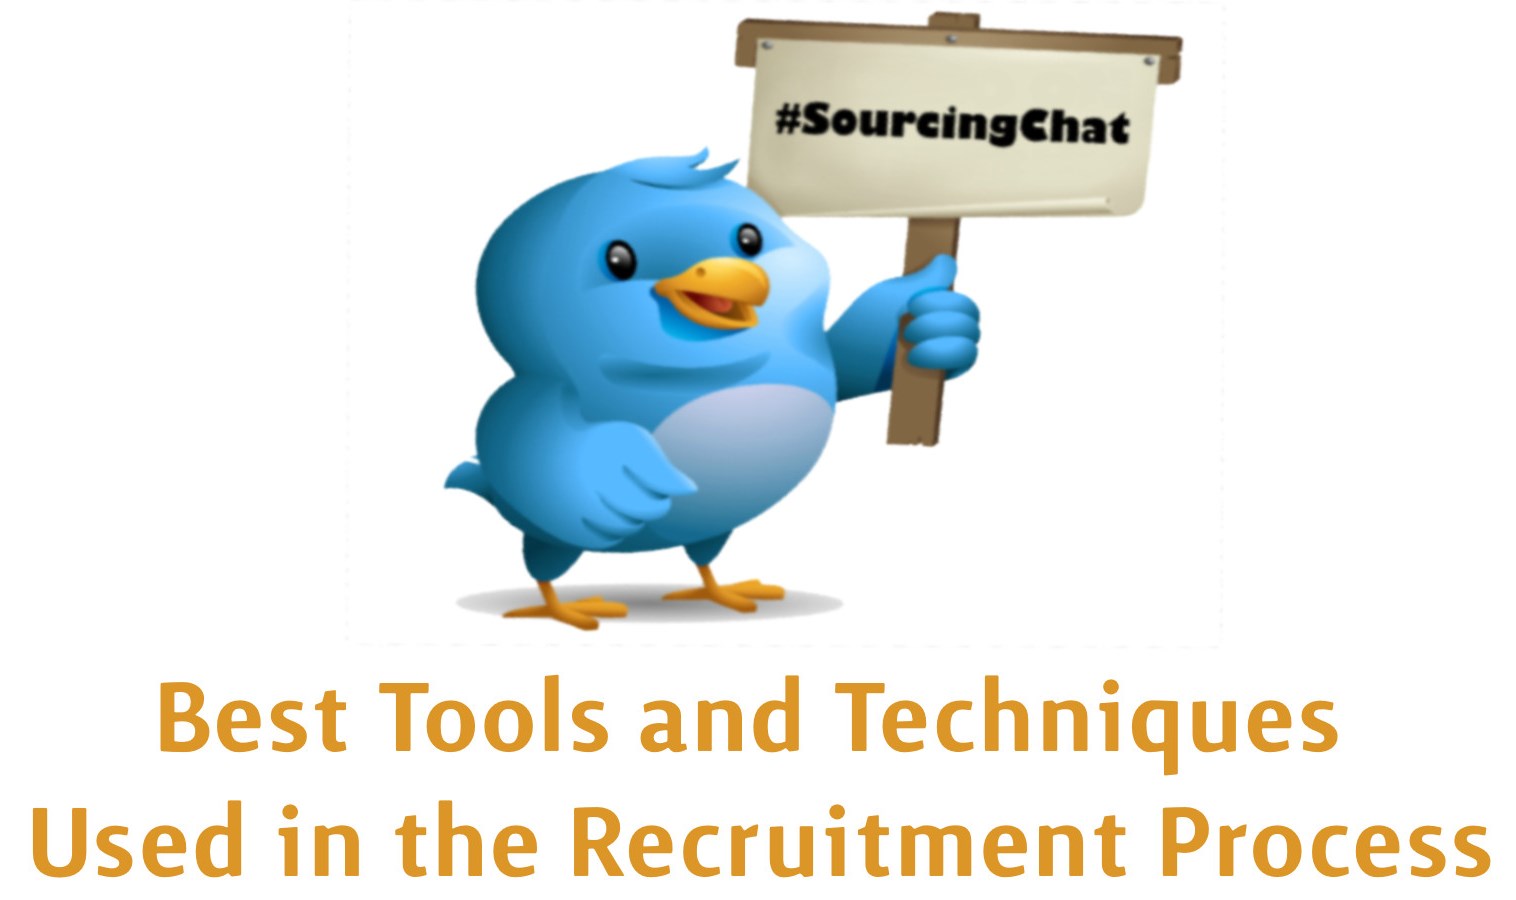 Top Tweets of the #SourcingChat - Best Tools and Techniques Used in the Recruitment Process